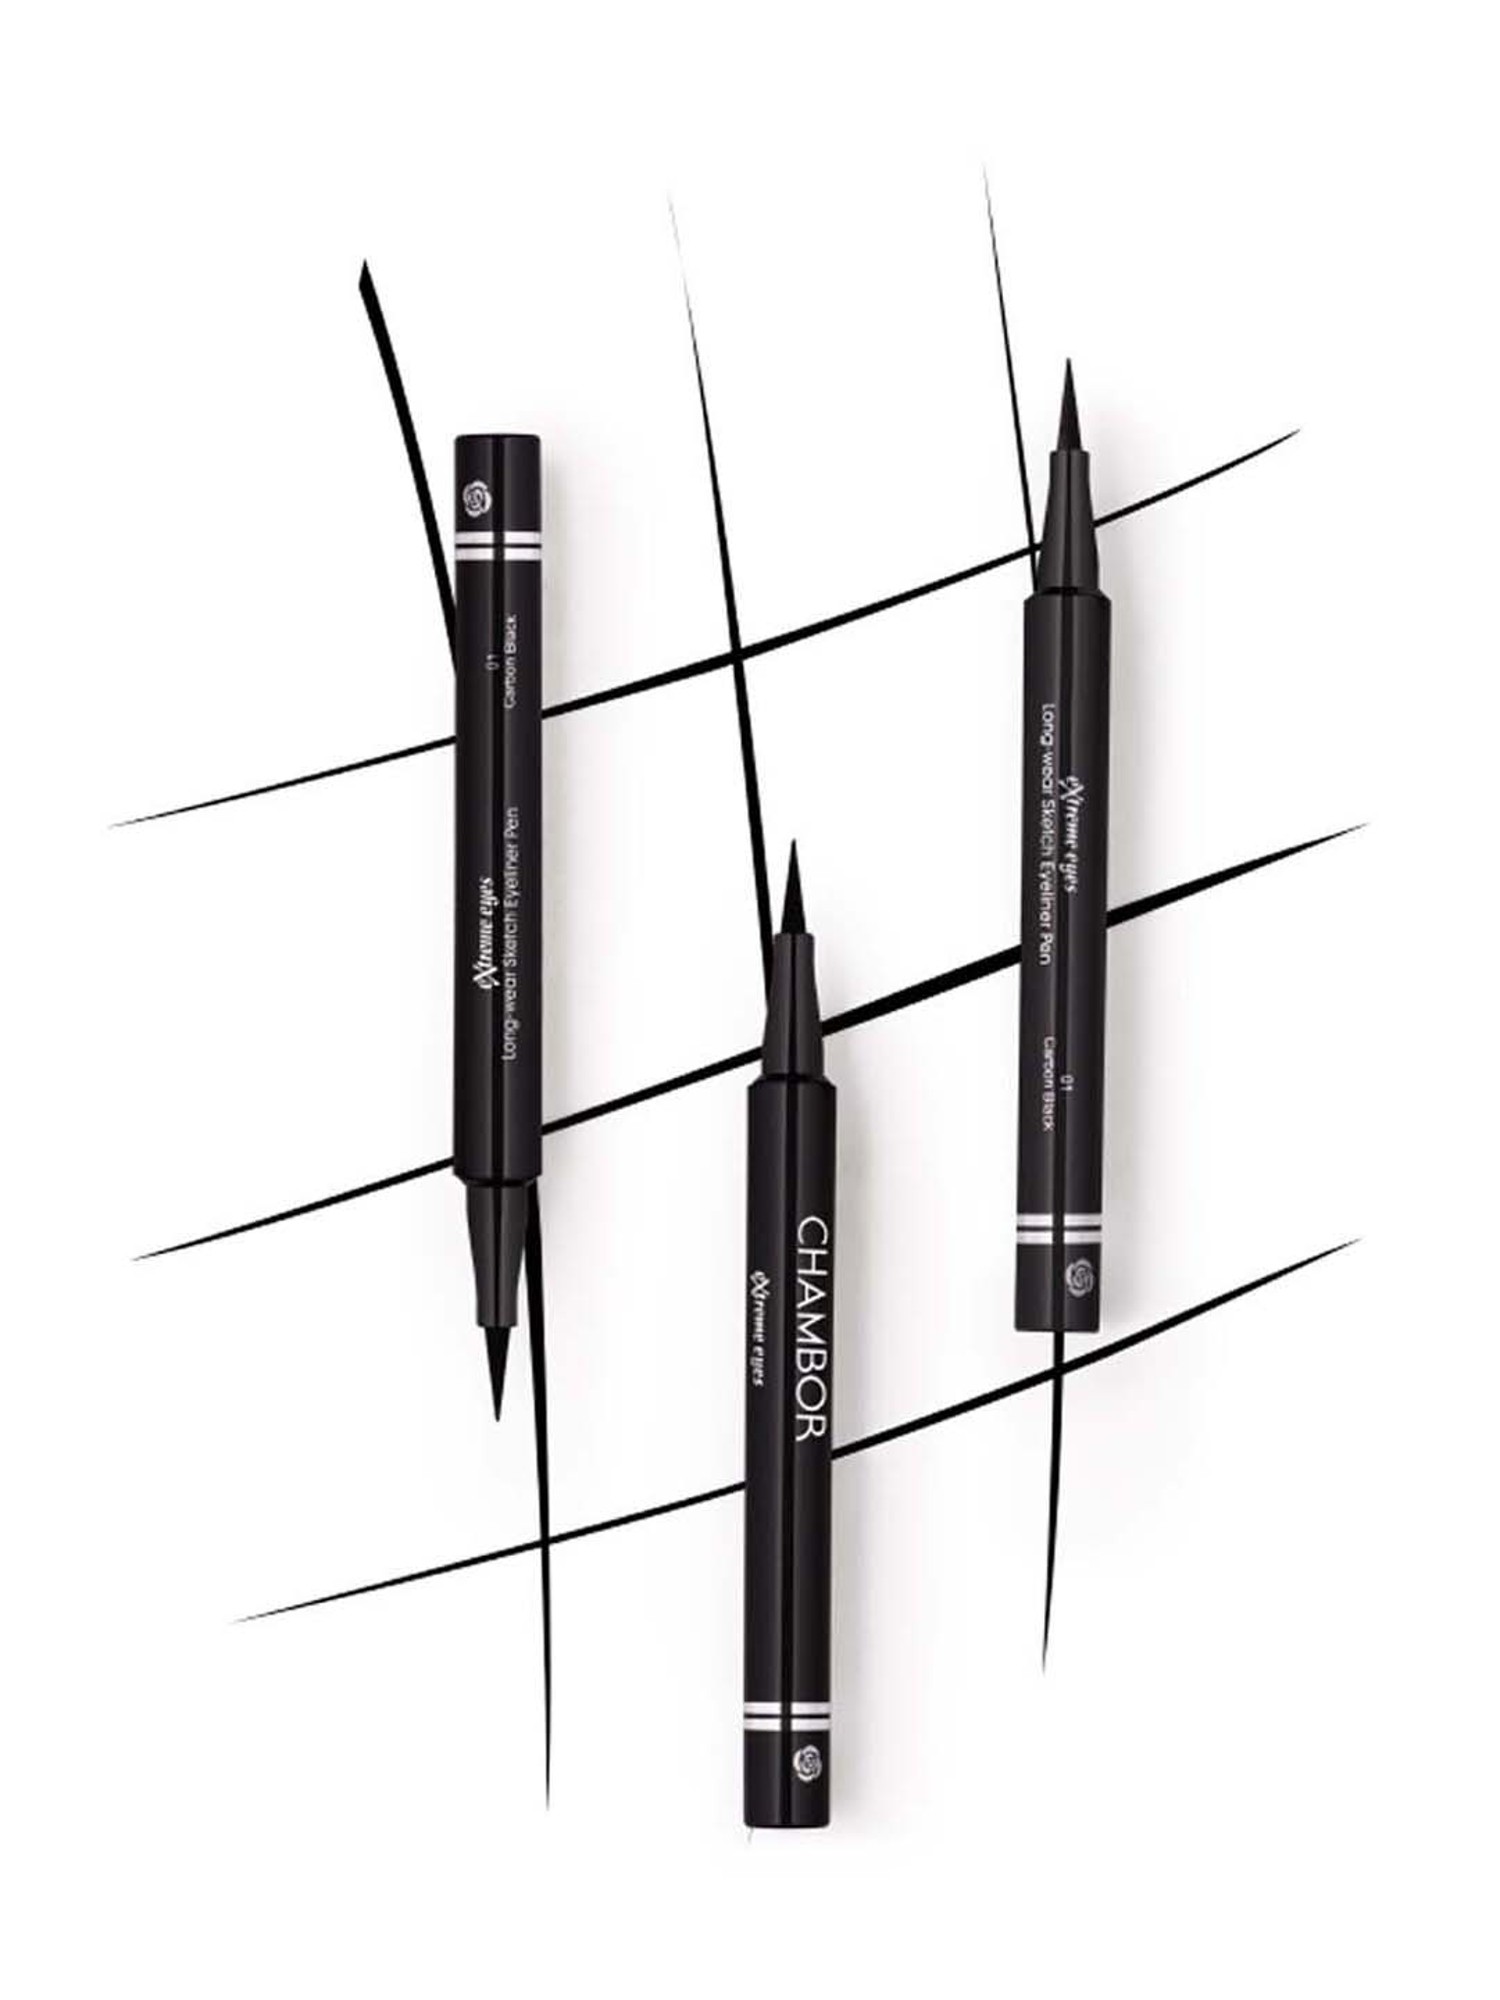 Nykaa Get Inked Sketch Eyeliner Pen  Onyx 01  New Buy Nykaa Get Inked Sketch  Eyeliner Pen  Onyx 01  New Online at Best Price in India  Nykaa